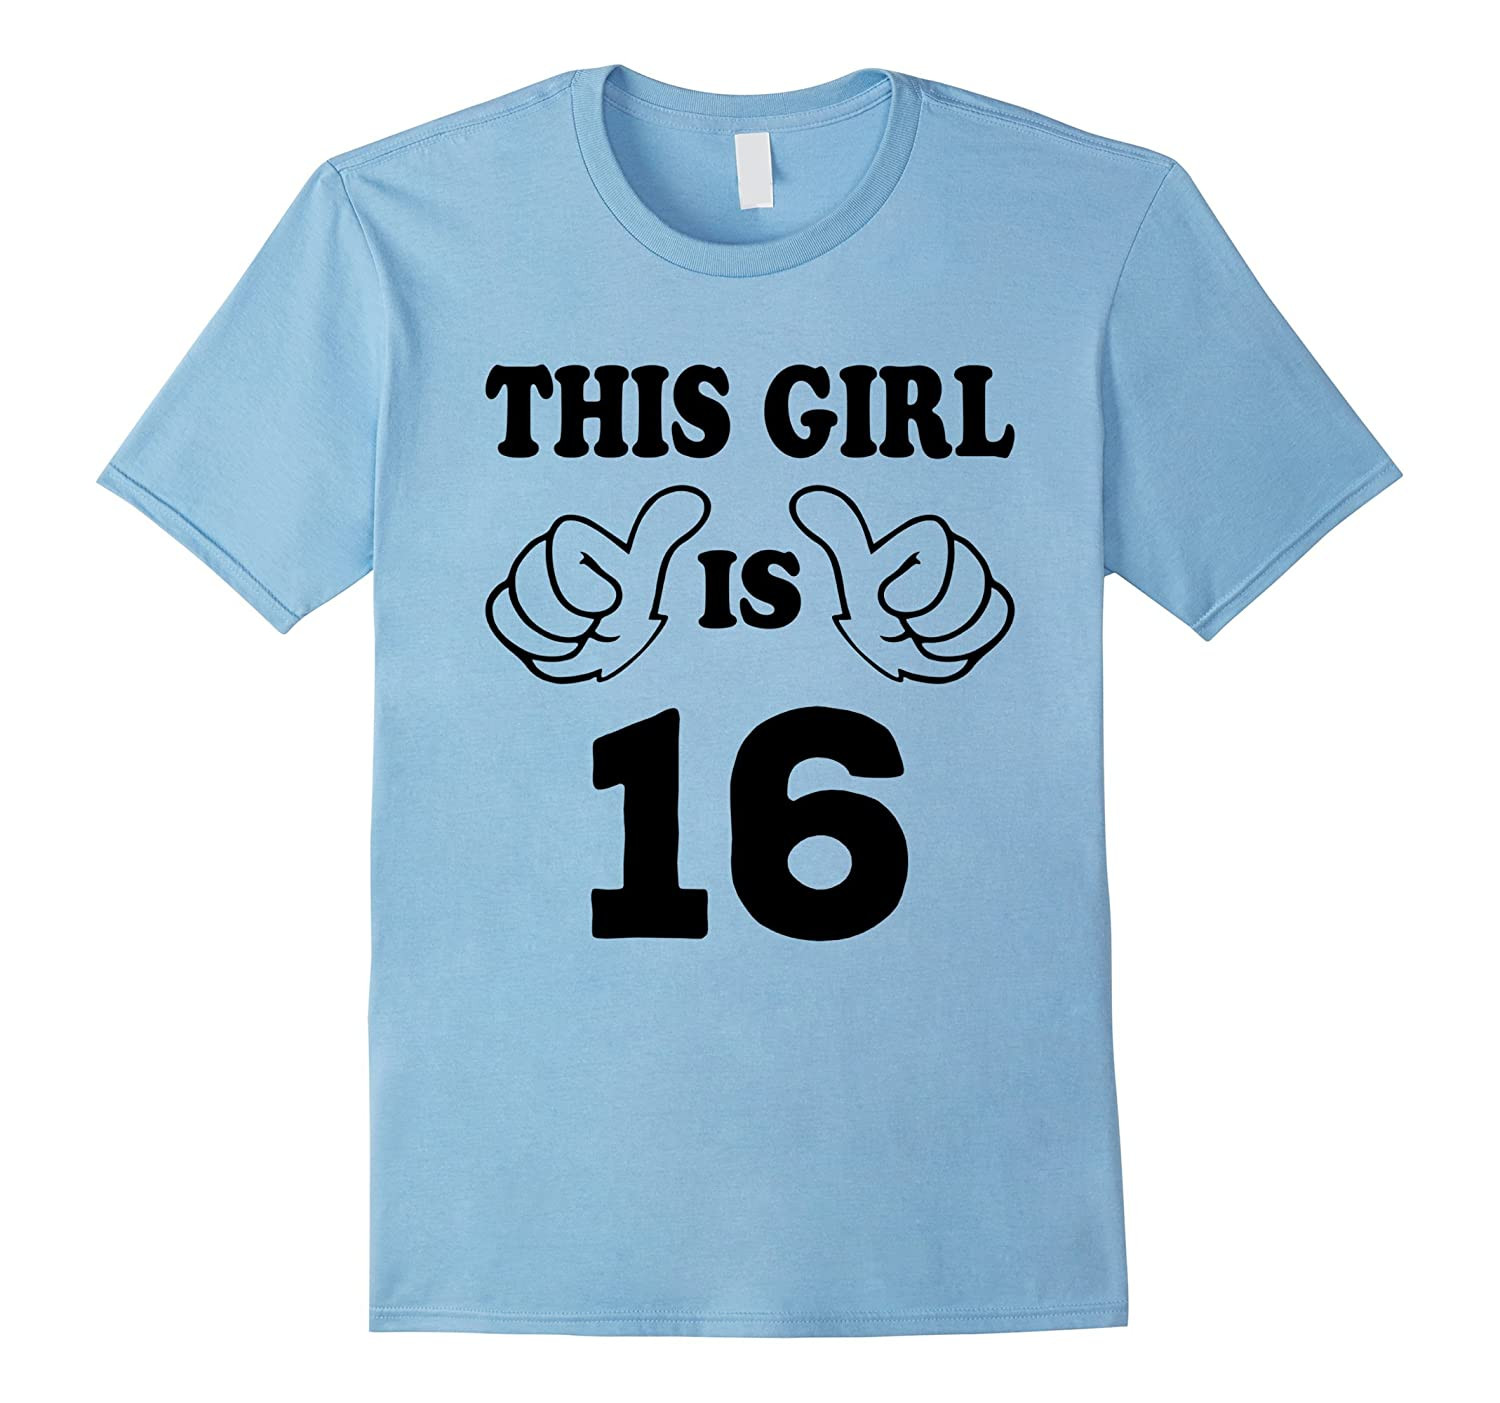 Birthday Gift Ideas For 16 Year Old Girl
 This Girl is sixteen 16 Years Old 16th Birthday Gift Ideas